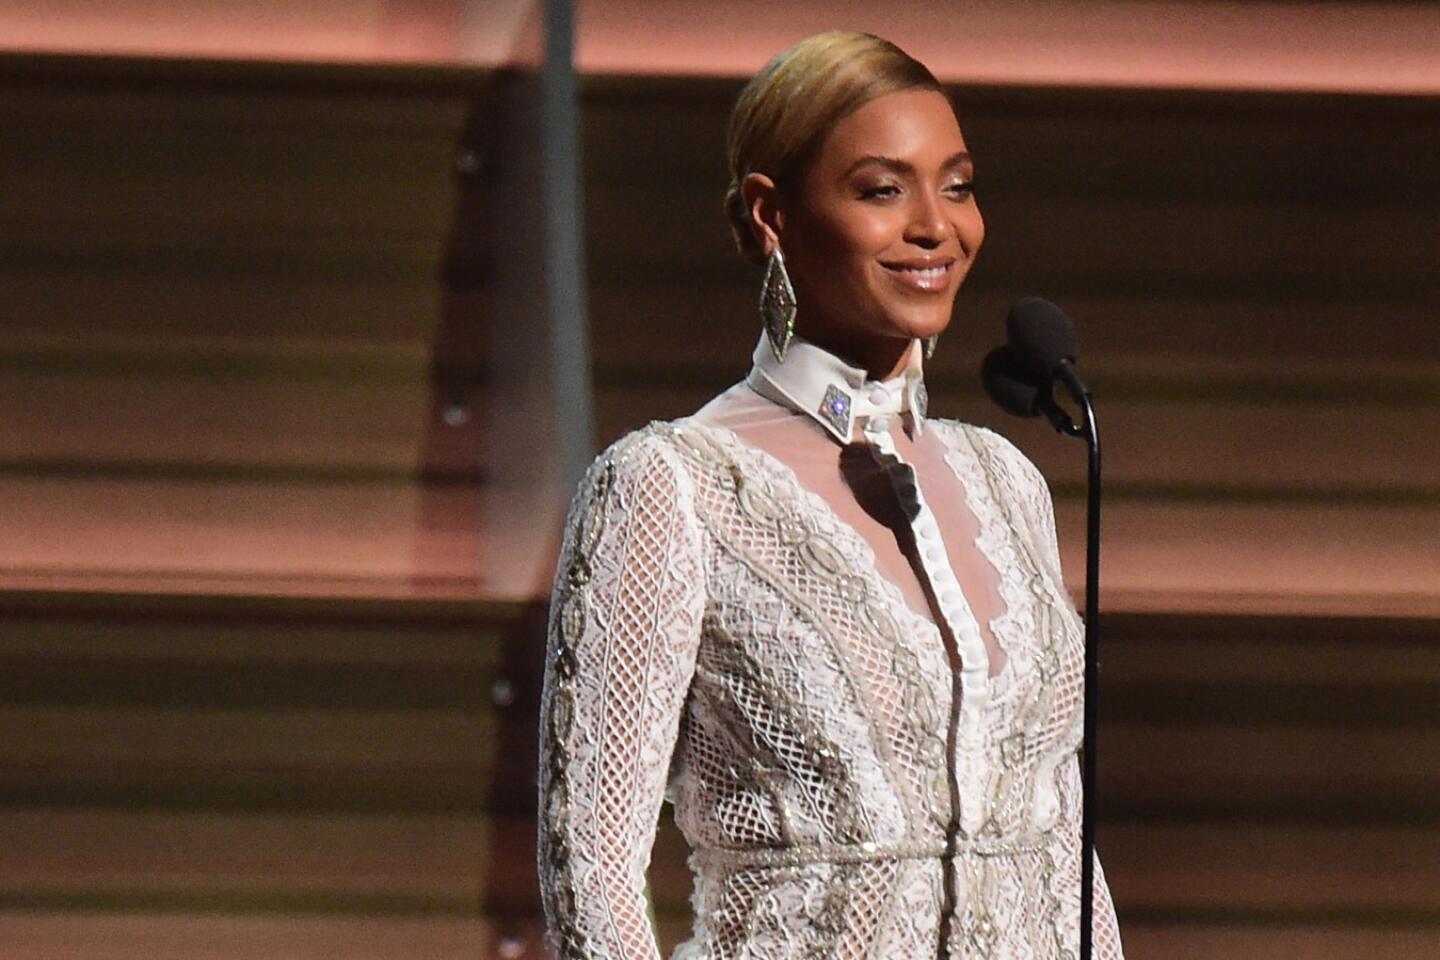 Beyonce presents the final award of the night, record of the year.